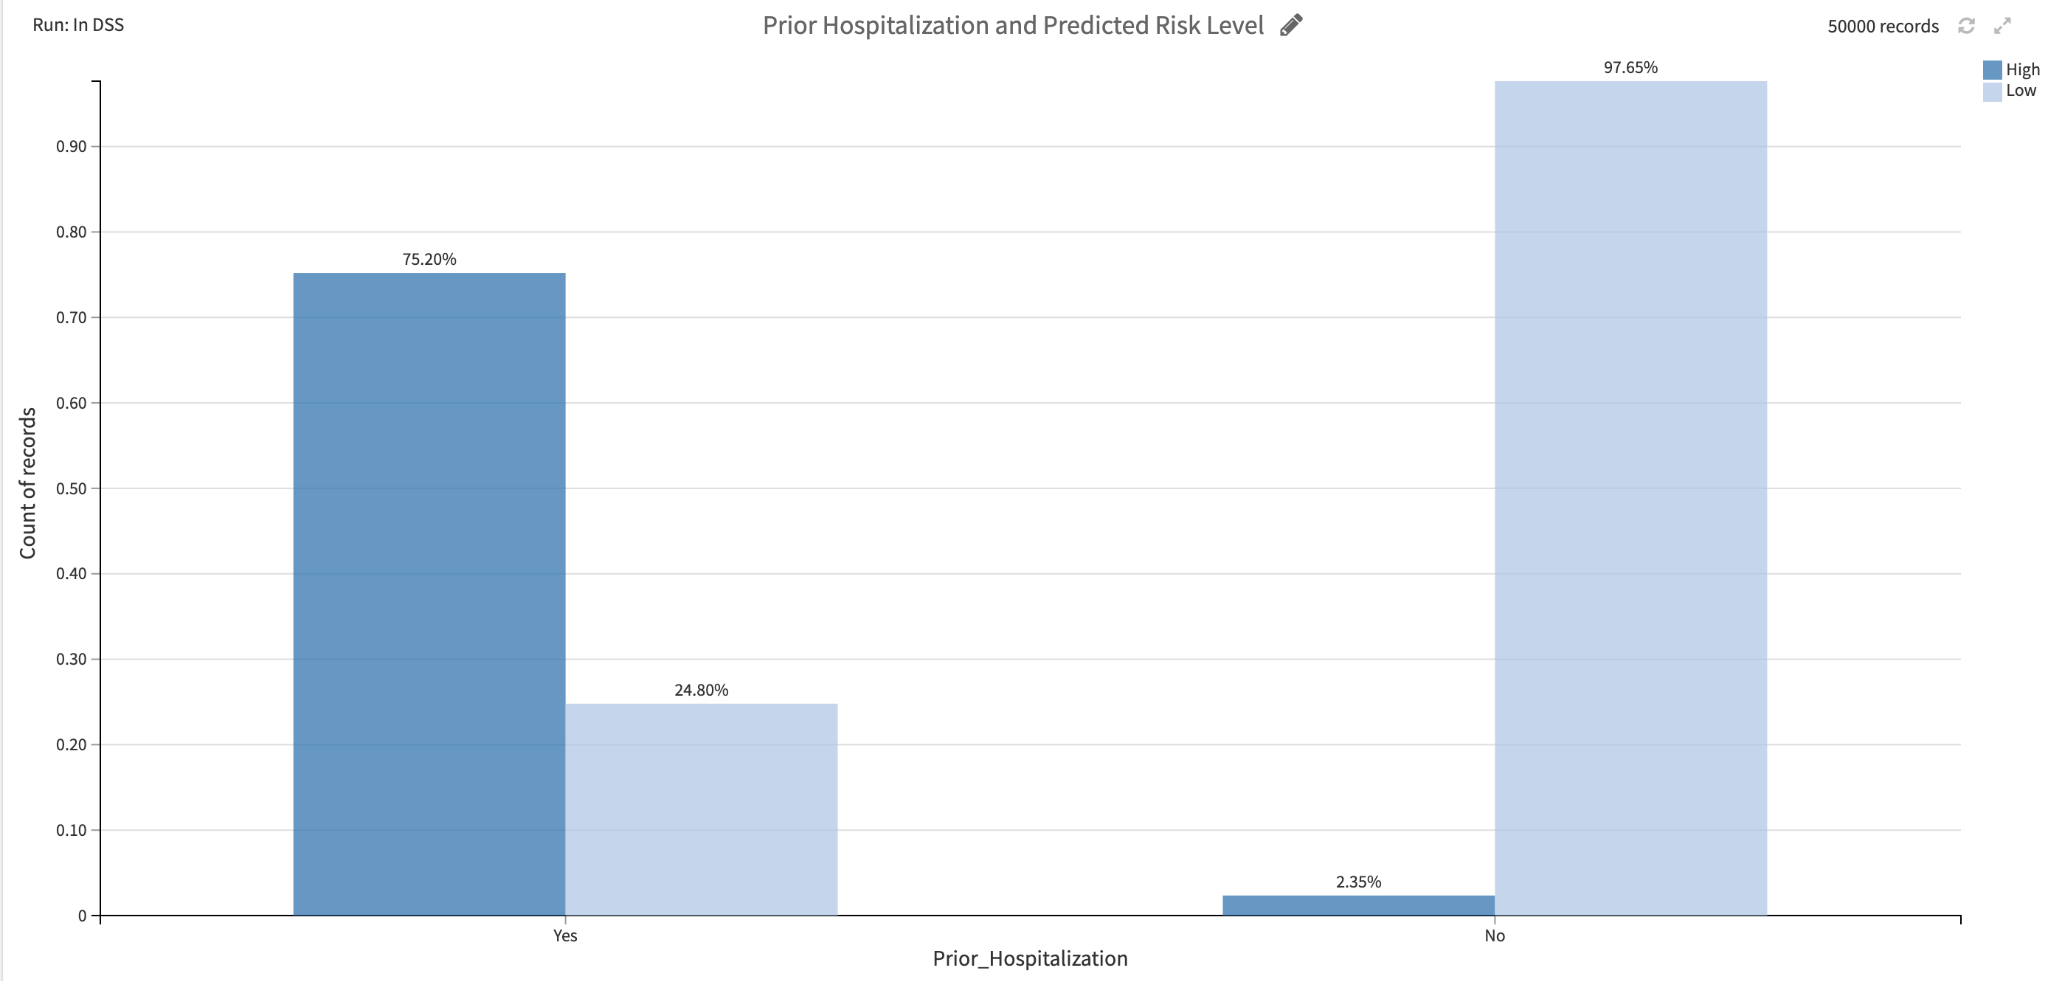 prior hospitalization and risk level chart